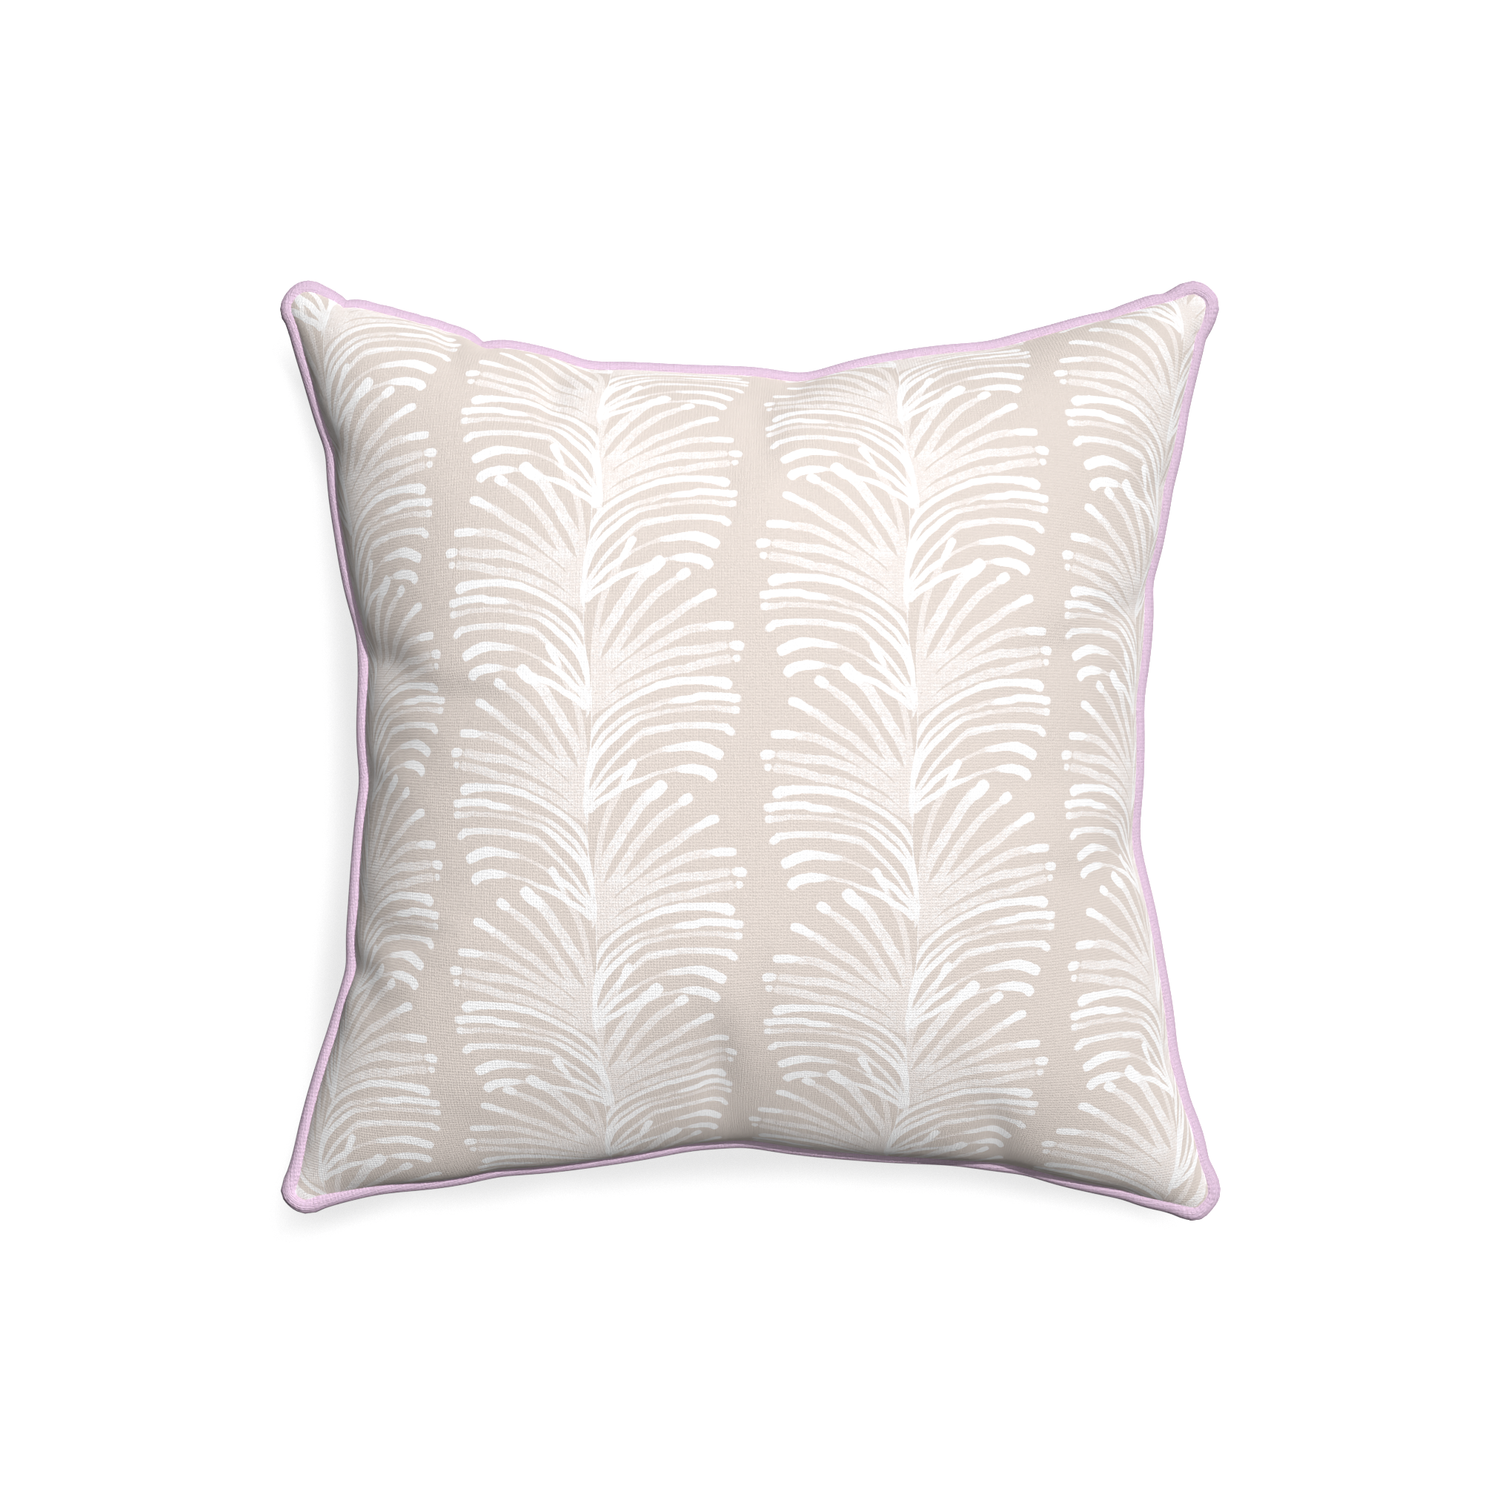 20-square emma sand custom sand colored botanical stripepillow with l piping on white background